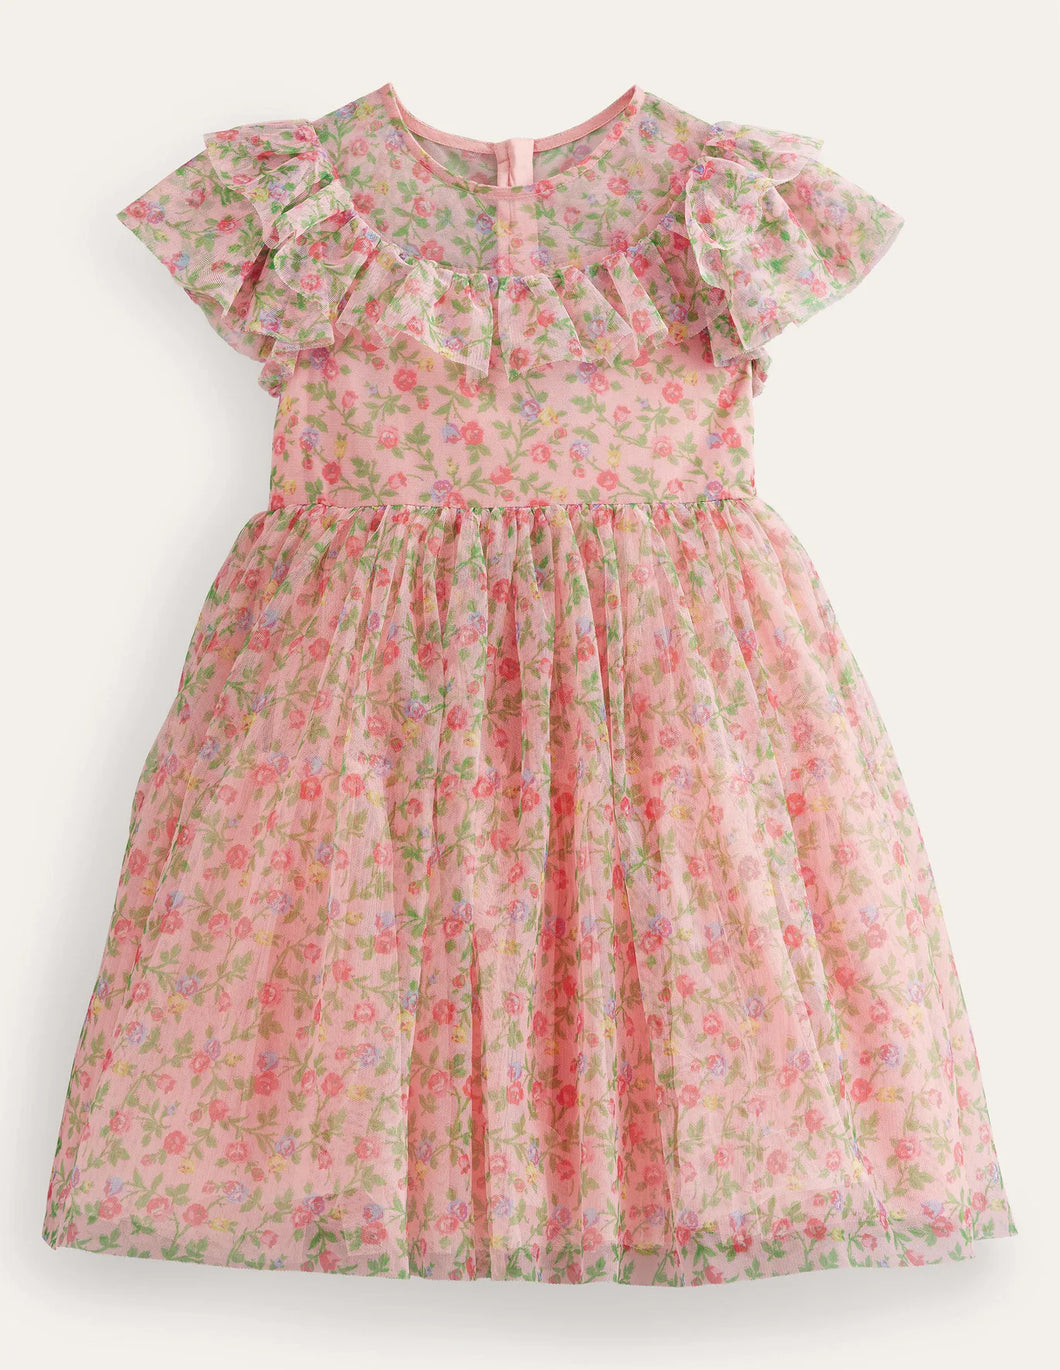 NWT Mini Boden Frilly Tulle Dress